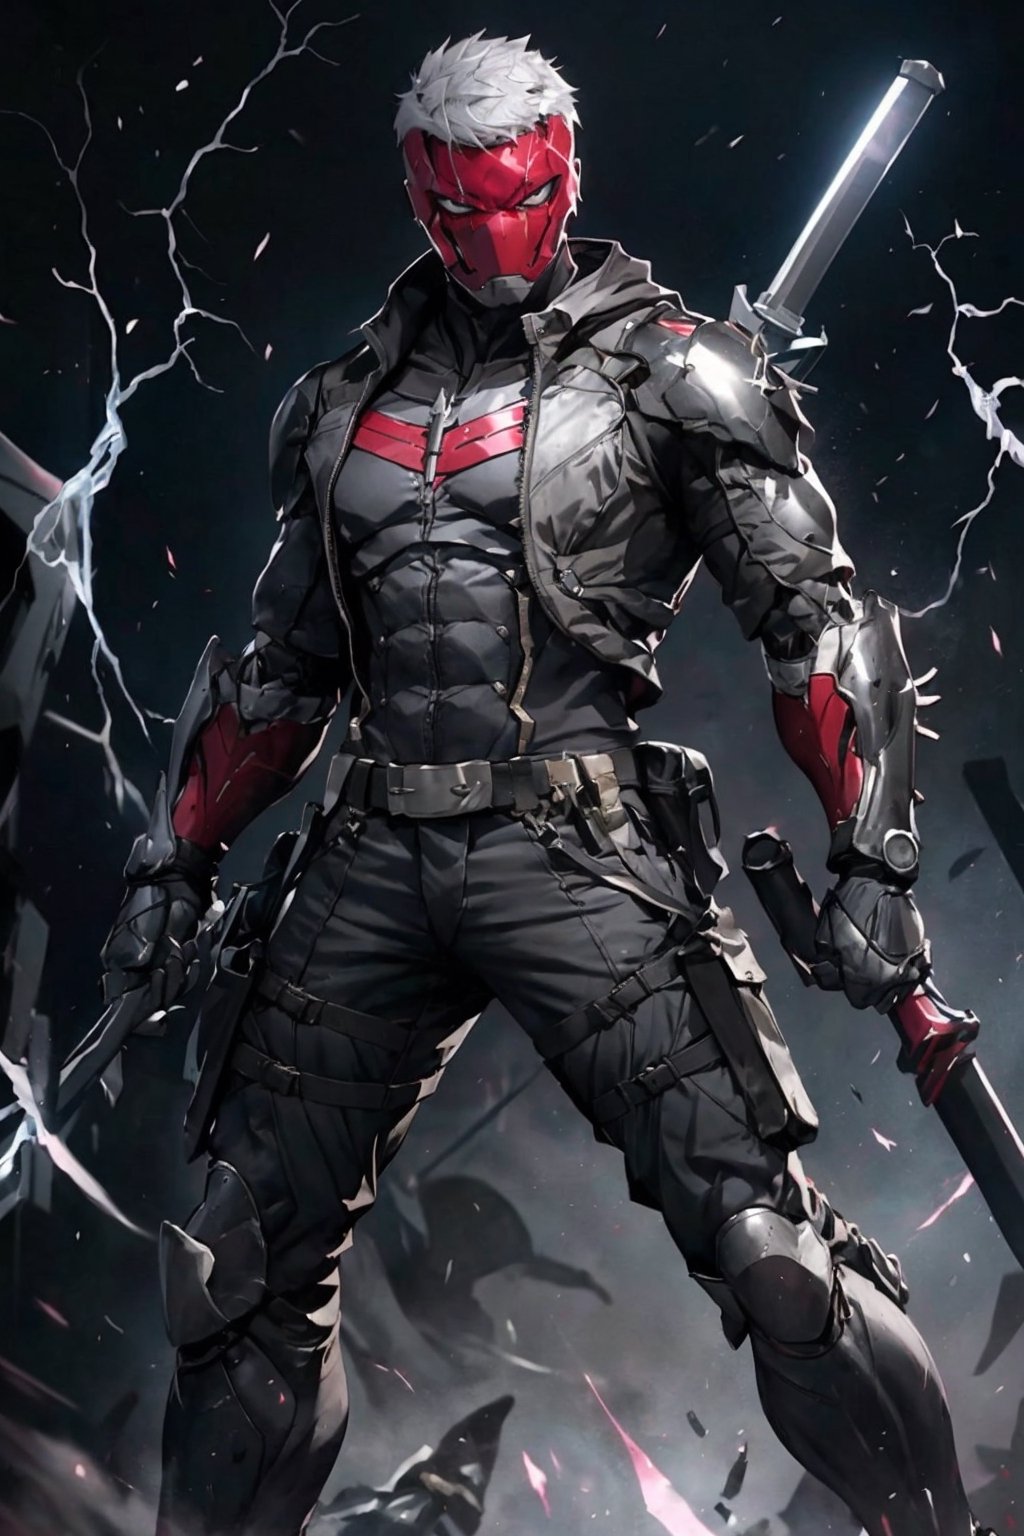 
an accurate and detailed full-body shot of a male superhero character named Wraith, tall and lean bulid, (Crimson half-mask:1.3), exposed cybernetic red eye, grafted cybernetic jawline, (Spiky white fringe hair:1.2), (choppy black undercut hairstyle:1.2), Skintight black ninja-tech suit with crimson energized circuitry, (electric blue biker jacket), asymmetric collar, rolled sleeves, Gunmetal armor plates on shoulders, chest emblem, (Fitted burgundy leather moto-pants), (blue-gray armorized cargo panels), Knee guards, armored greaves, black combat boots, cyberized gunmetal strike gauntlet, Holsters, sheaths, tech-utility pouches, holding an obsidian high-frequency katana, masterpiece, high quality, 4K, raidenmgr, nero, rhdc, a man, red helment, brown leather jacket, gray skintight suit, gloves, belt, boots